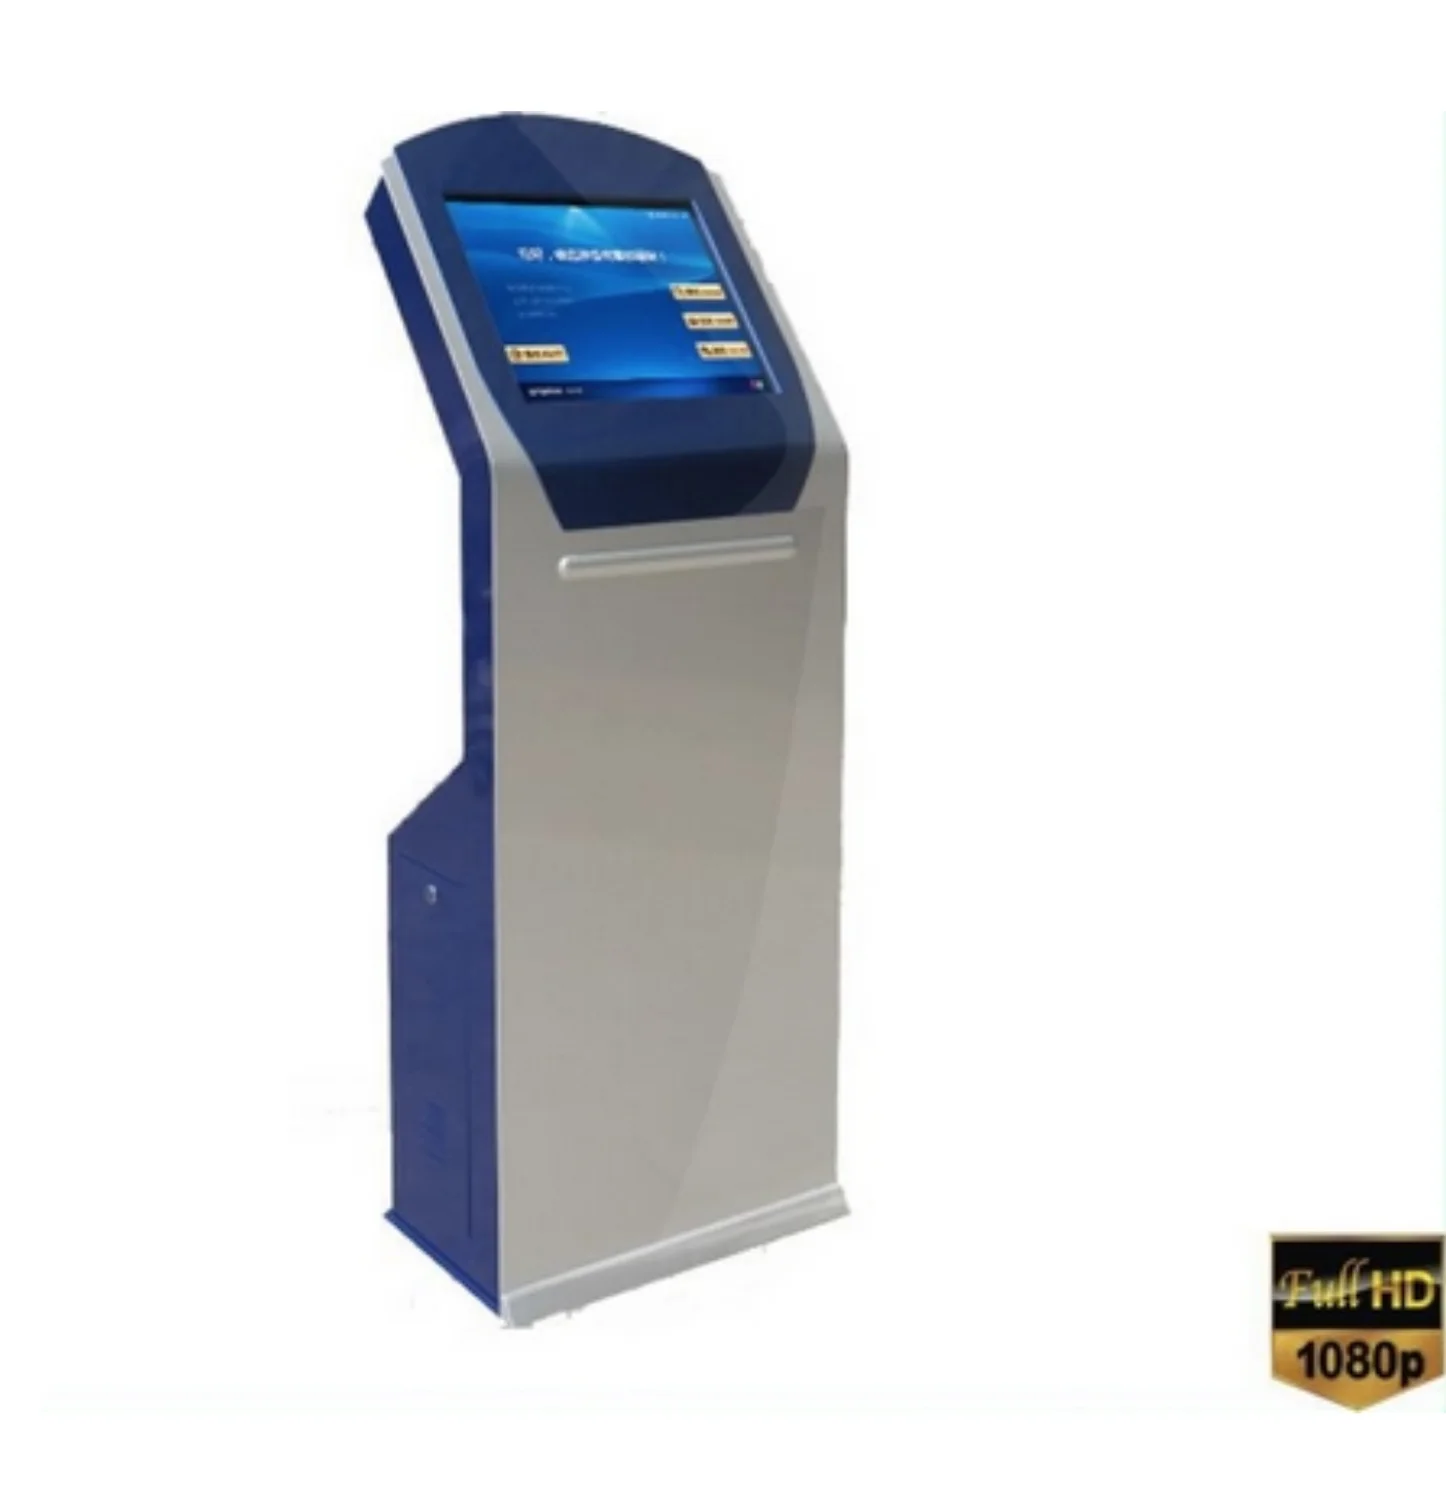 Newly designed 19 inch self-service touch screen payment Kiosk enlarge